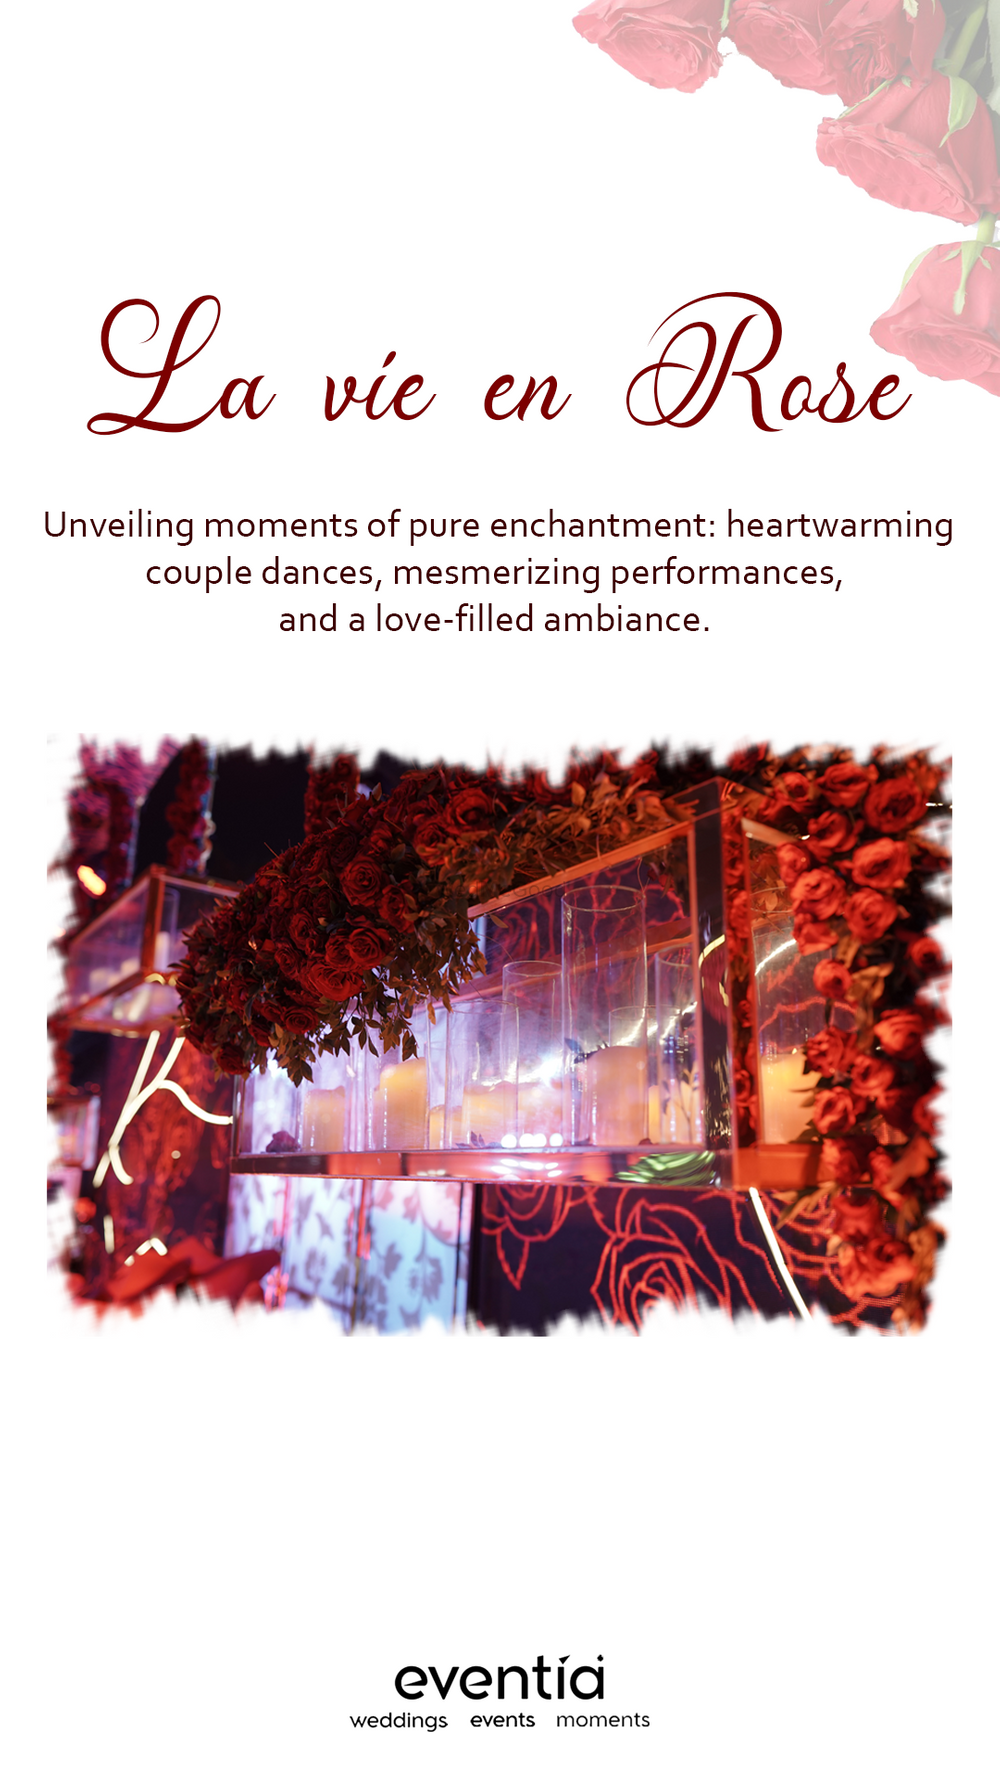 Photo From La vie en Rose - By Eventia Event Designers